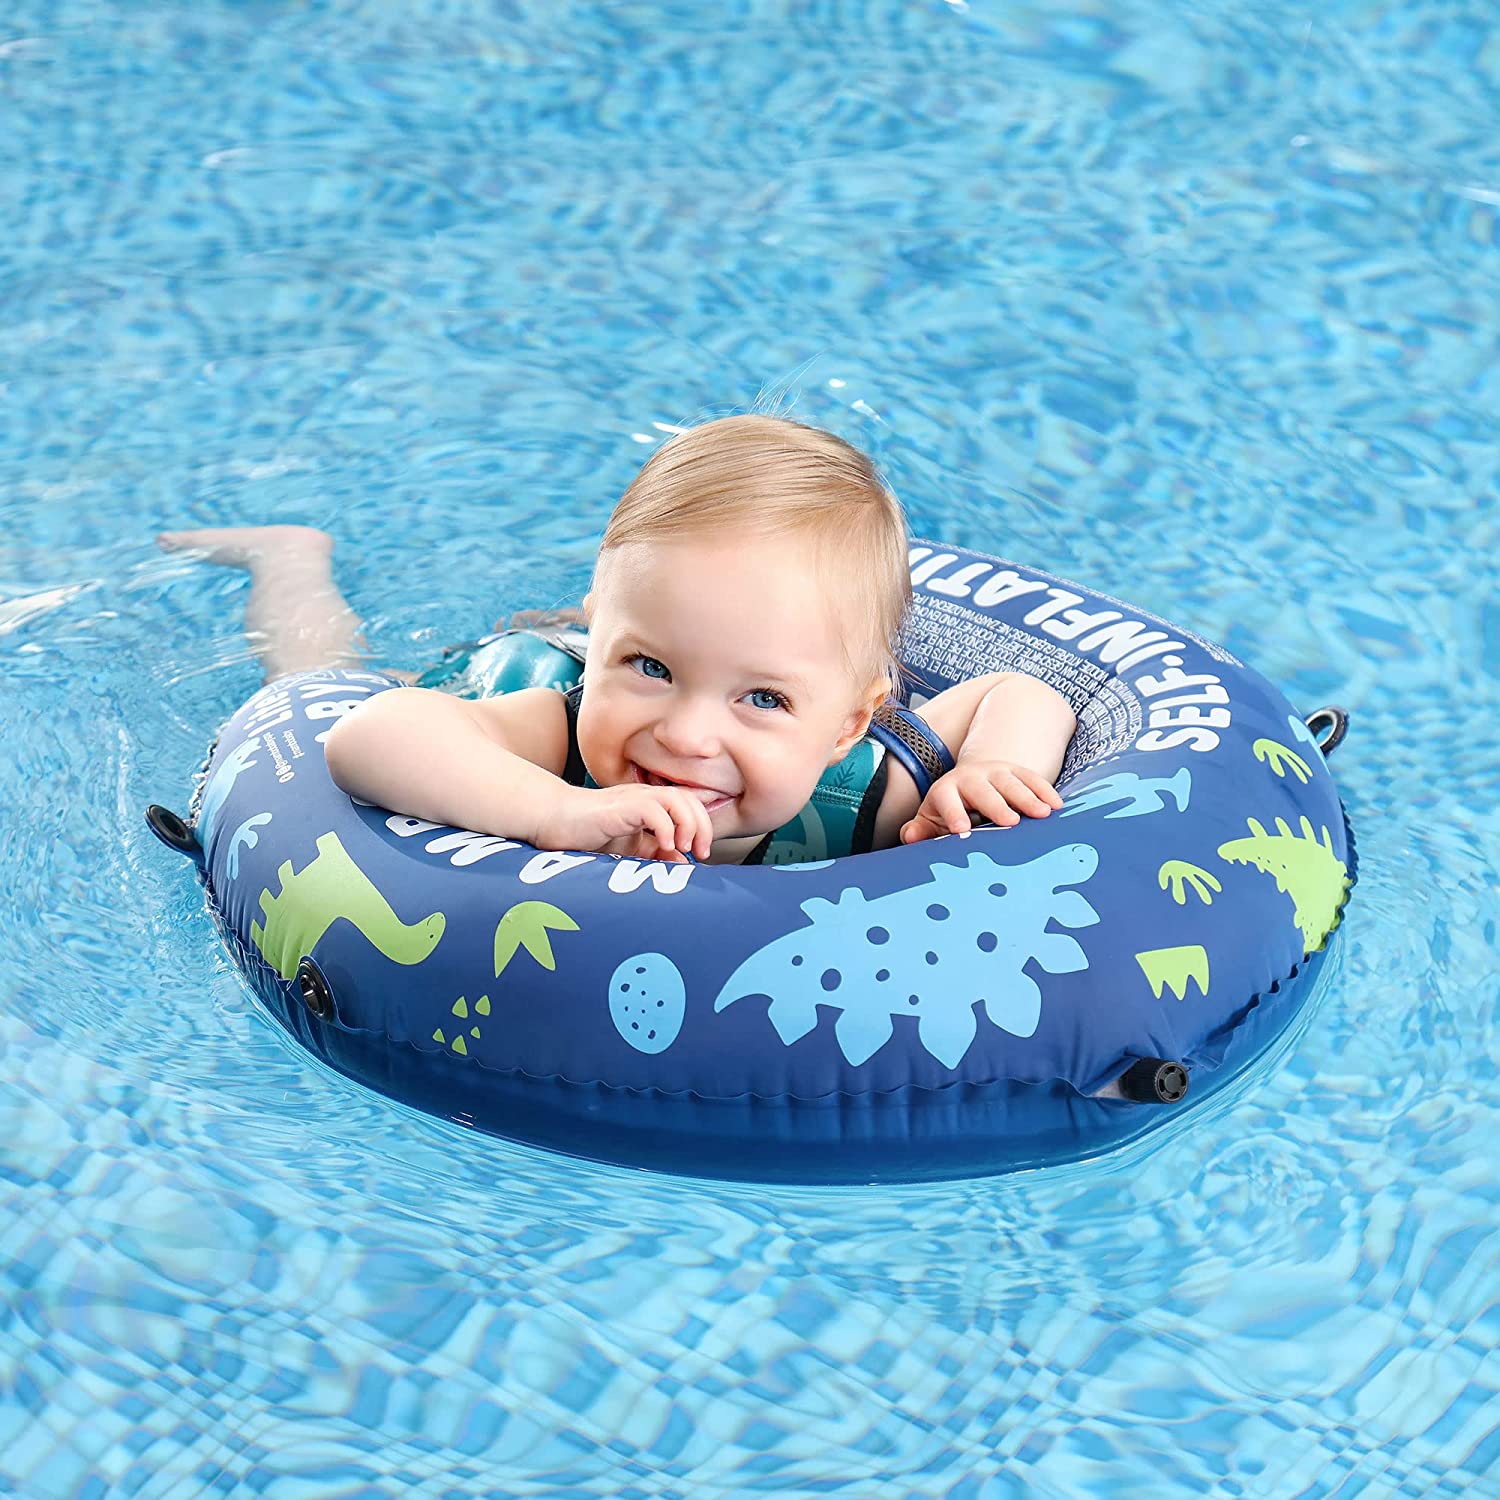 Proactive Baby Mambobaby Baby Self-Inflatable Baby Float with Canopy - Special Edition